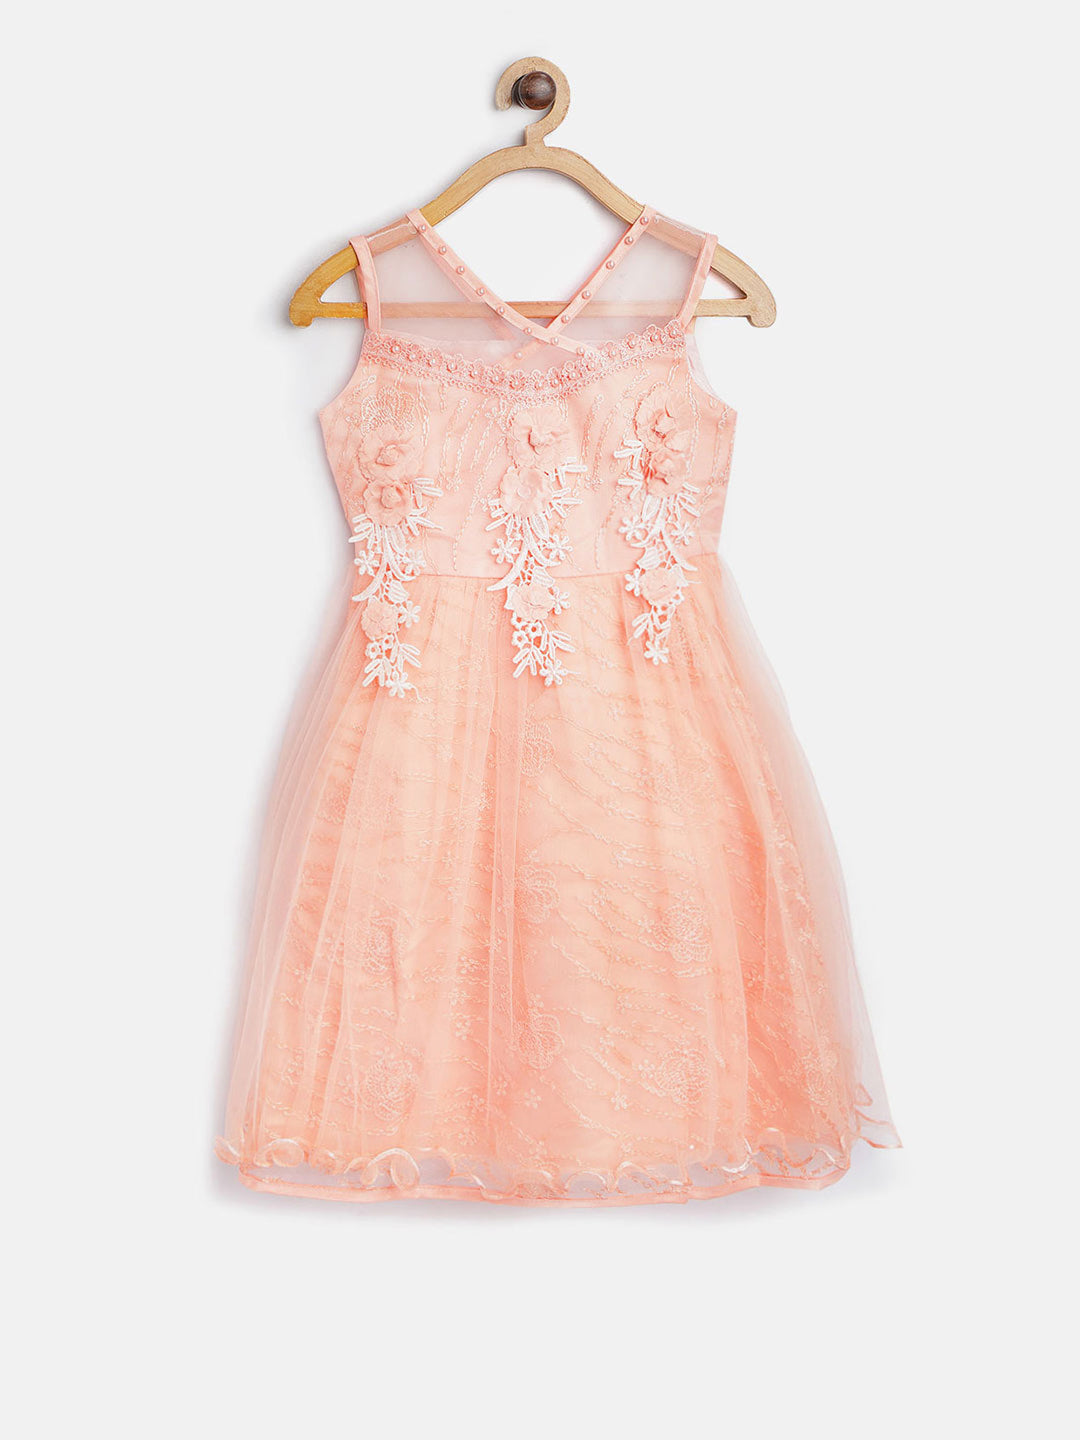 Gilr's Berry Pink Pearls And Embroidered Party Dress - StyleStone Kid